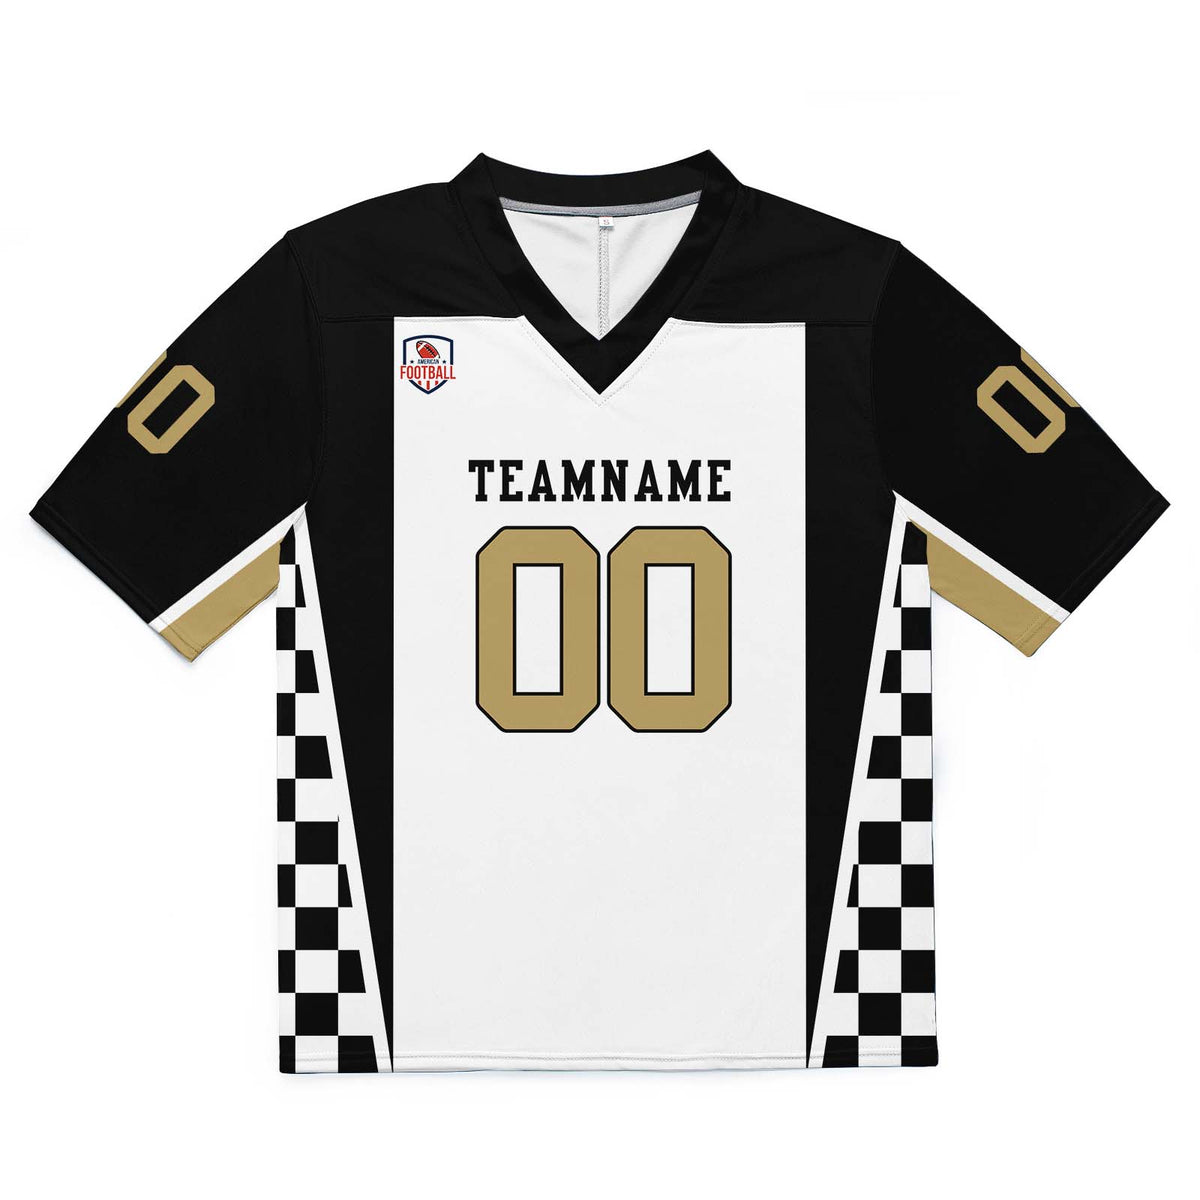 Custom Football Jersey Shirt Personalized Stitched Printed Team Name Number Black & White